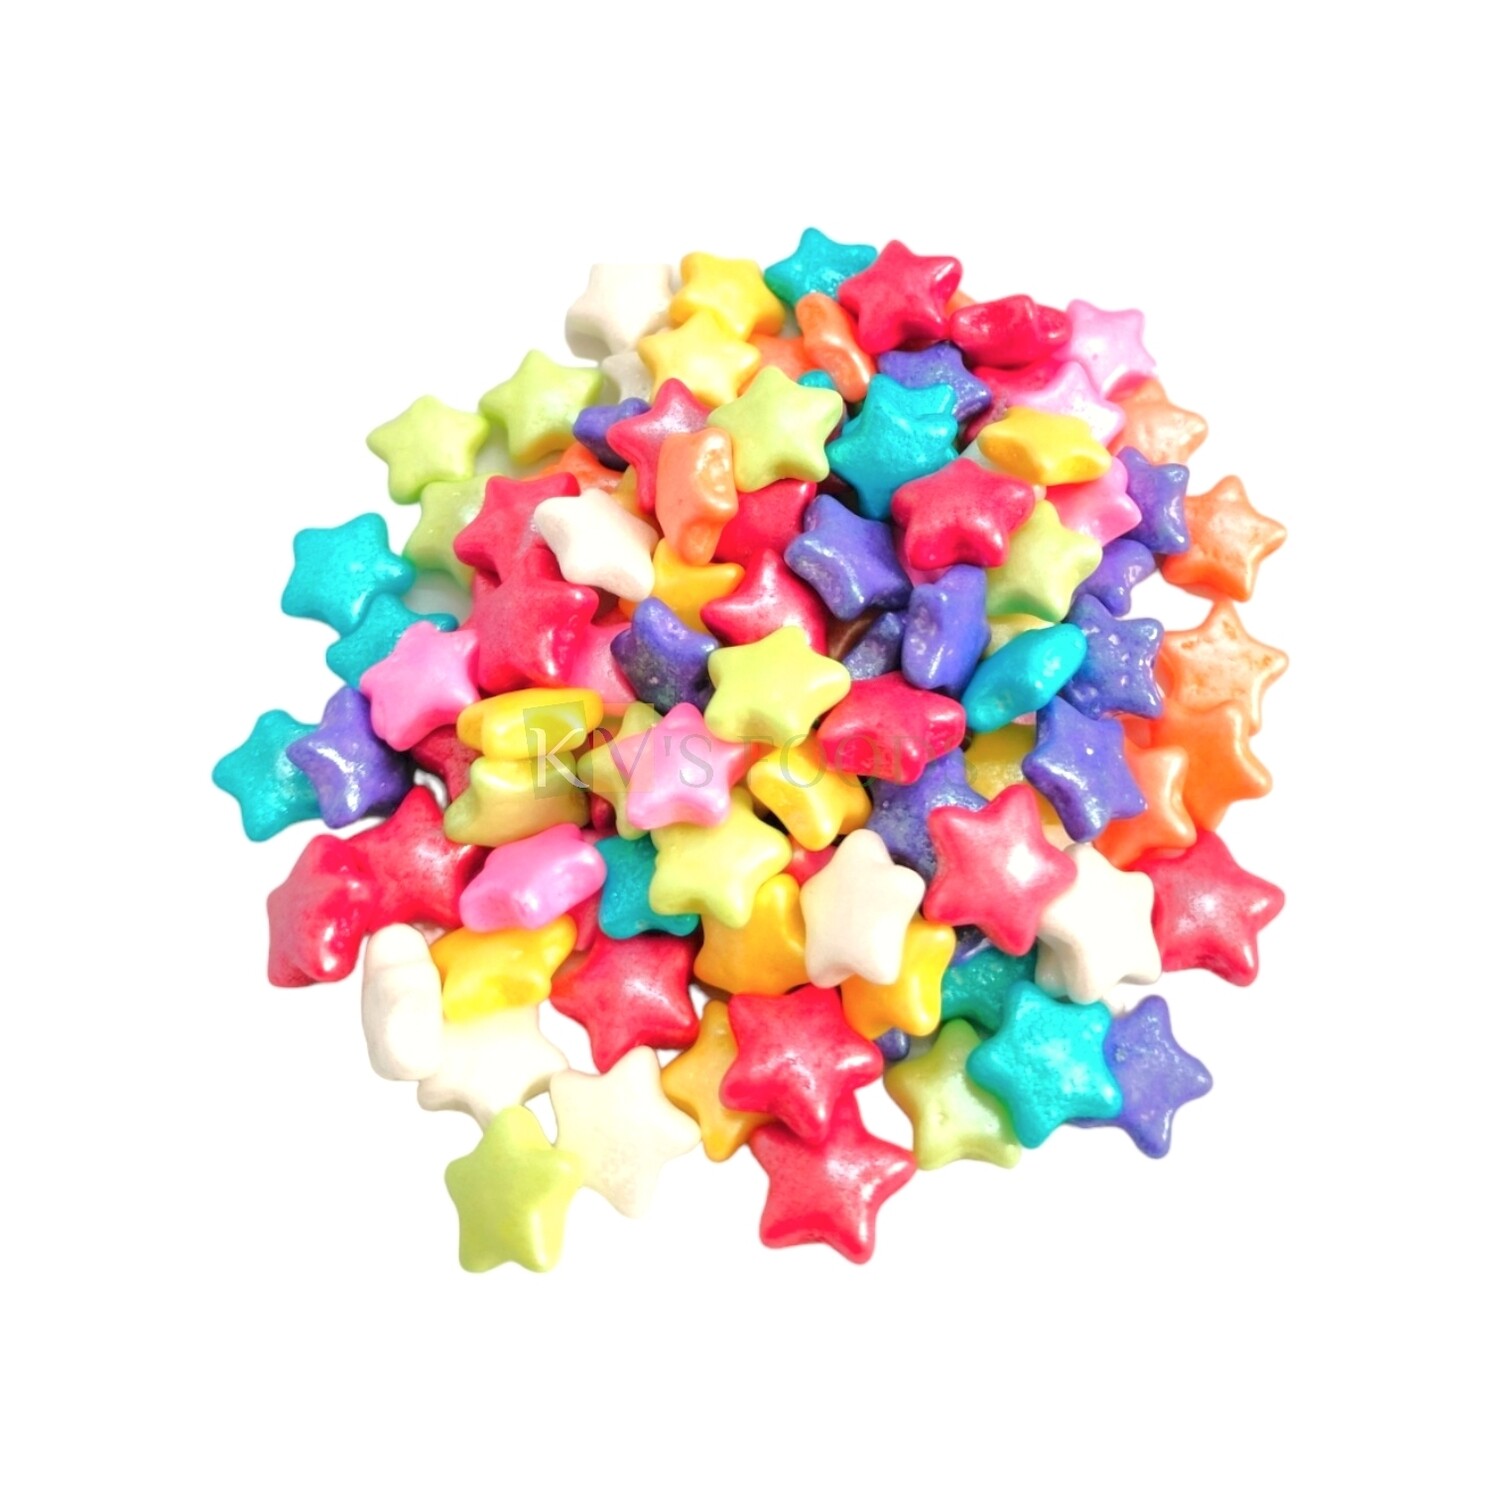 Metallic Rainbow Multicoloured Star Shaped Big Size Edible Sprinkles Confetti, Decorative Toppings for Birthday Doughnuts, Ice-Creams Cakepops Cakesicles DIY Valentine Baby Shower Cake Decorations